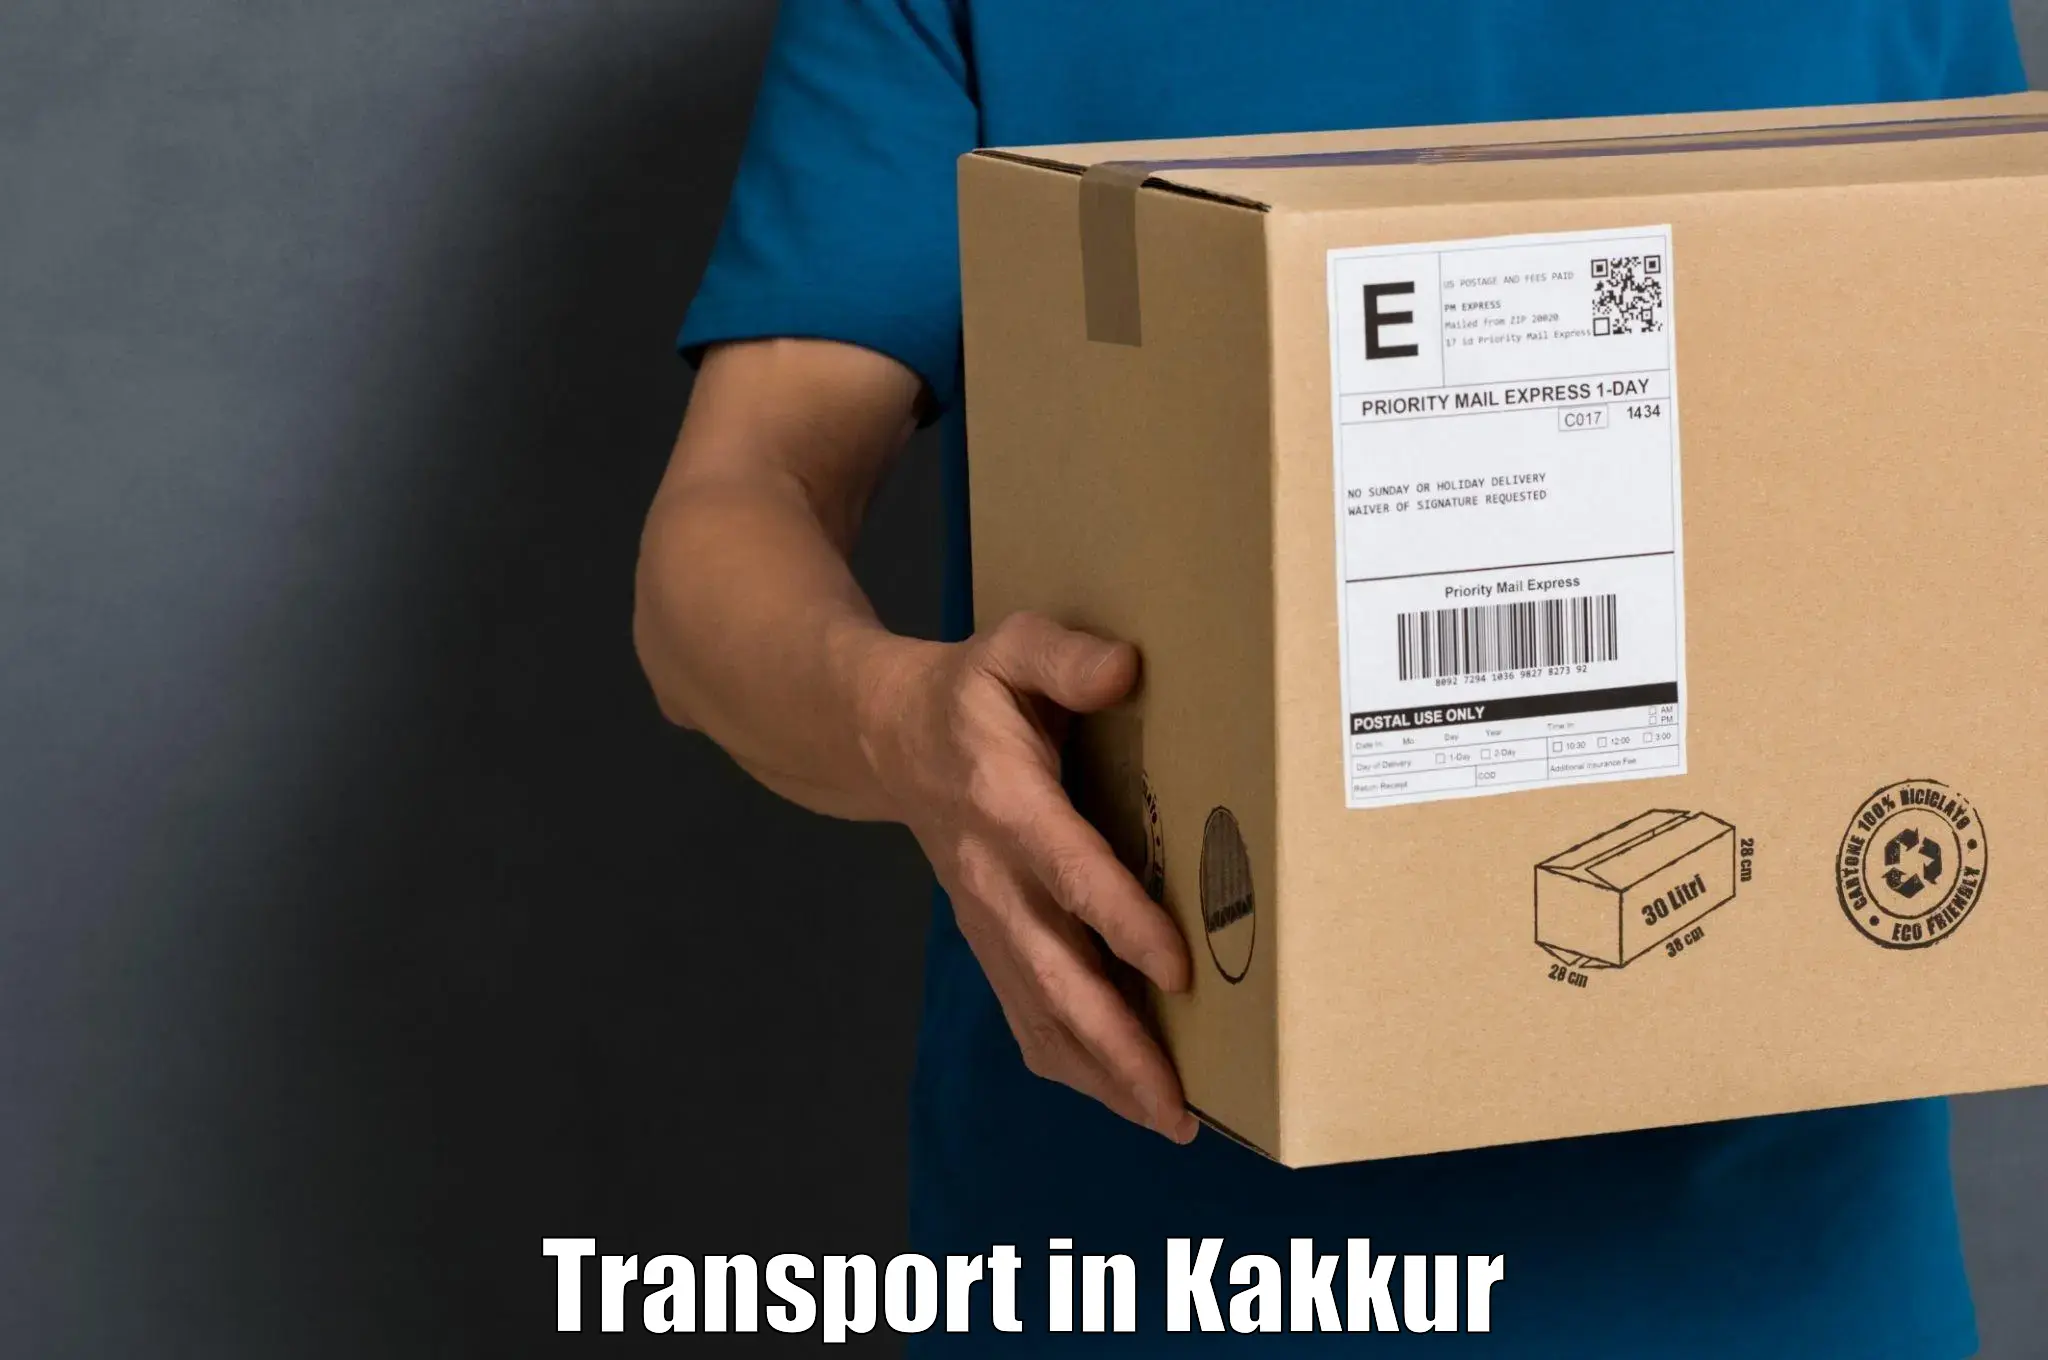 Container transport service in Kakkur